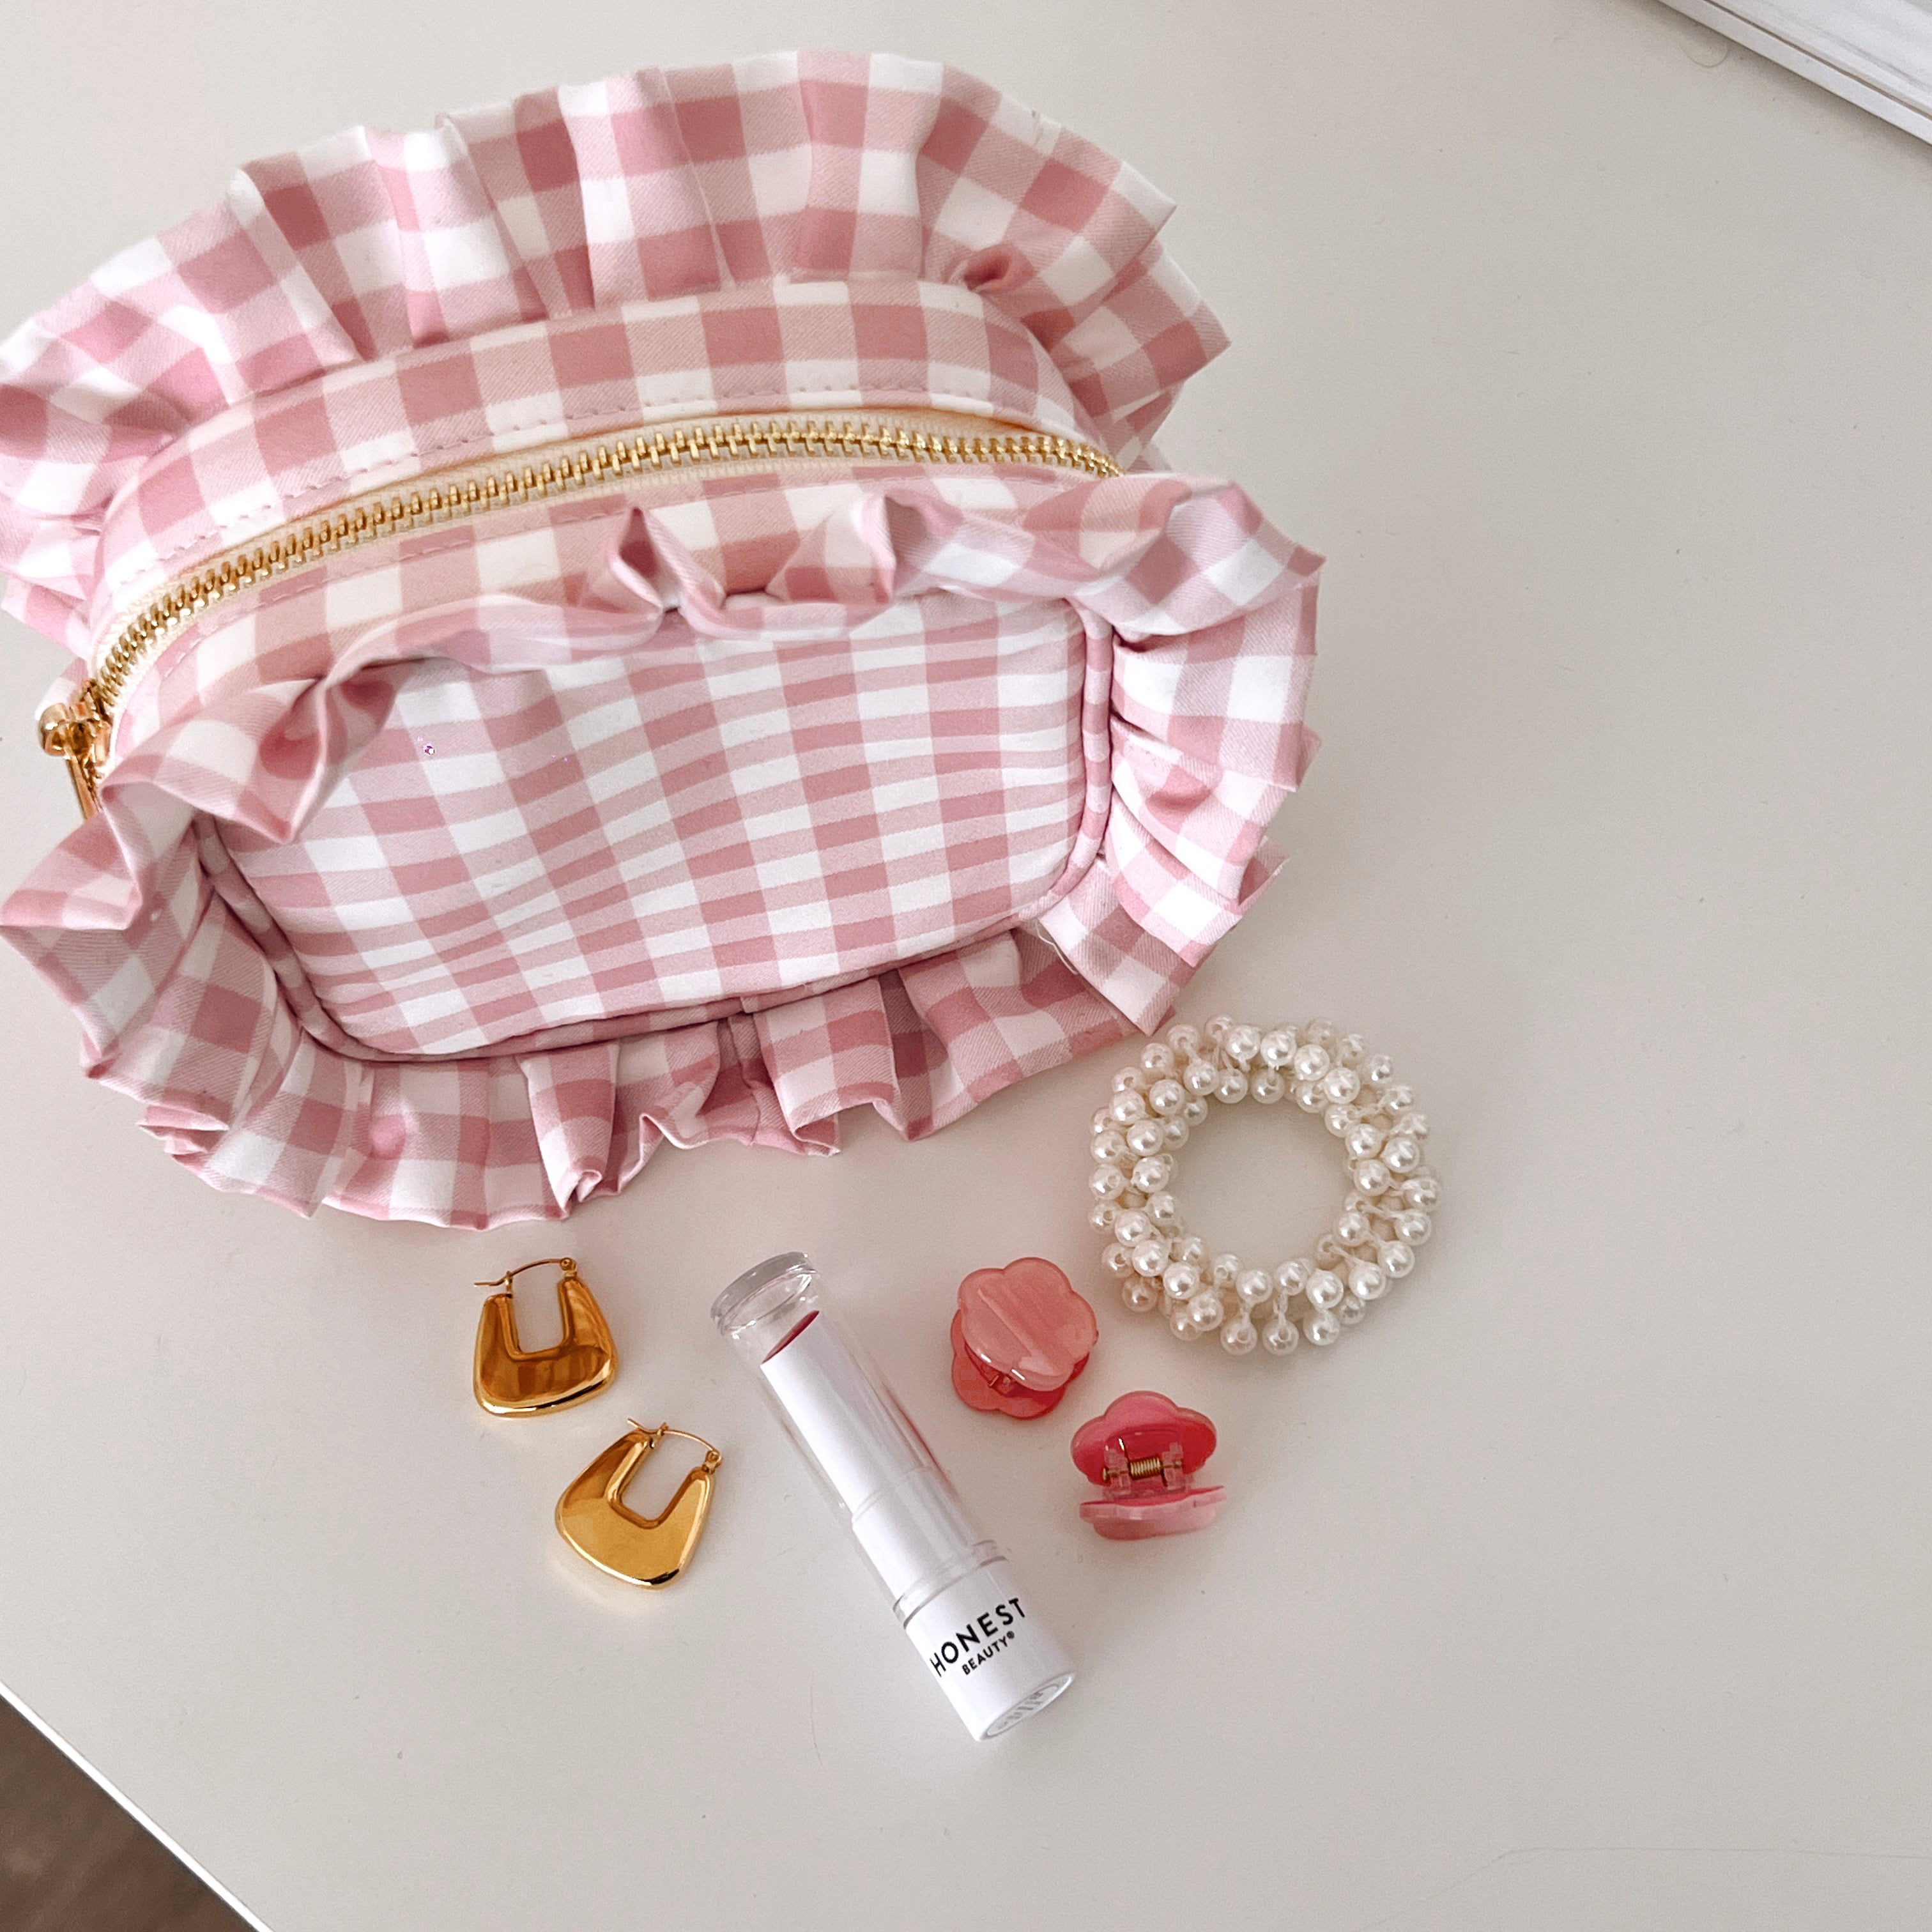 Pink Gingham Ruffle Pouch next to earrings, lipstick, hair clips and a scrunchie.